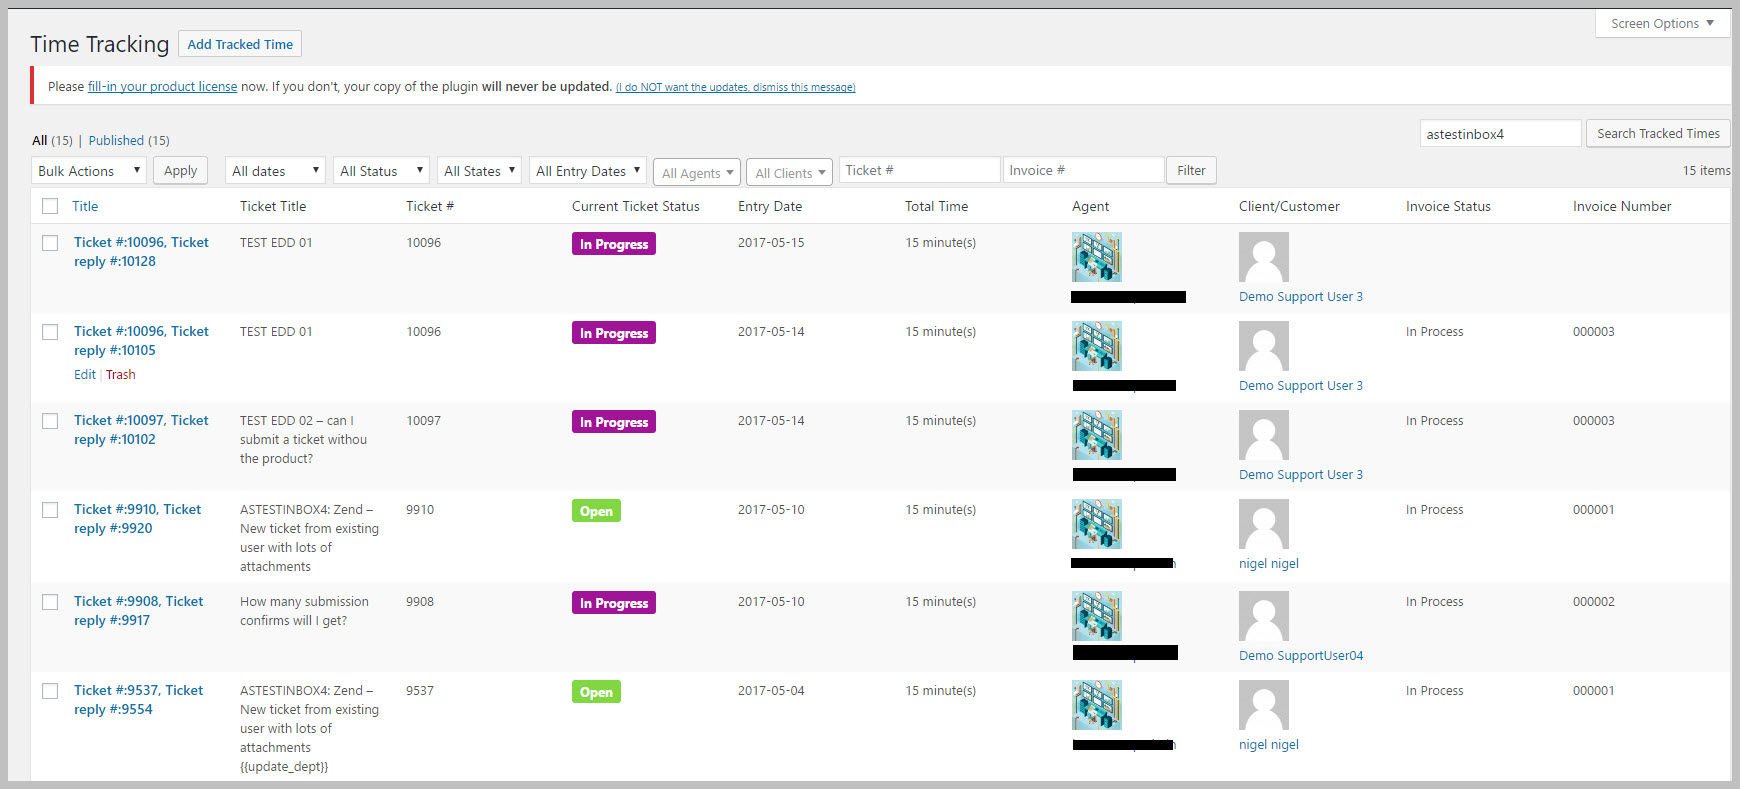 Awesome support Time Tracking and Invoicing (Early Release).jpg